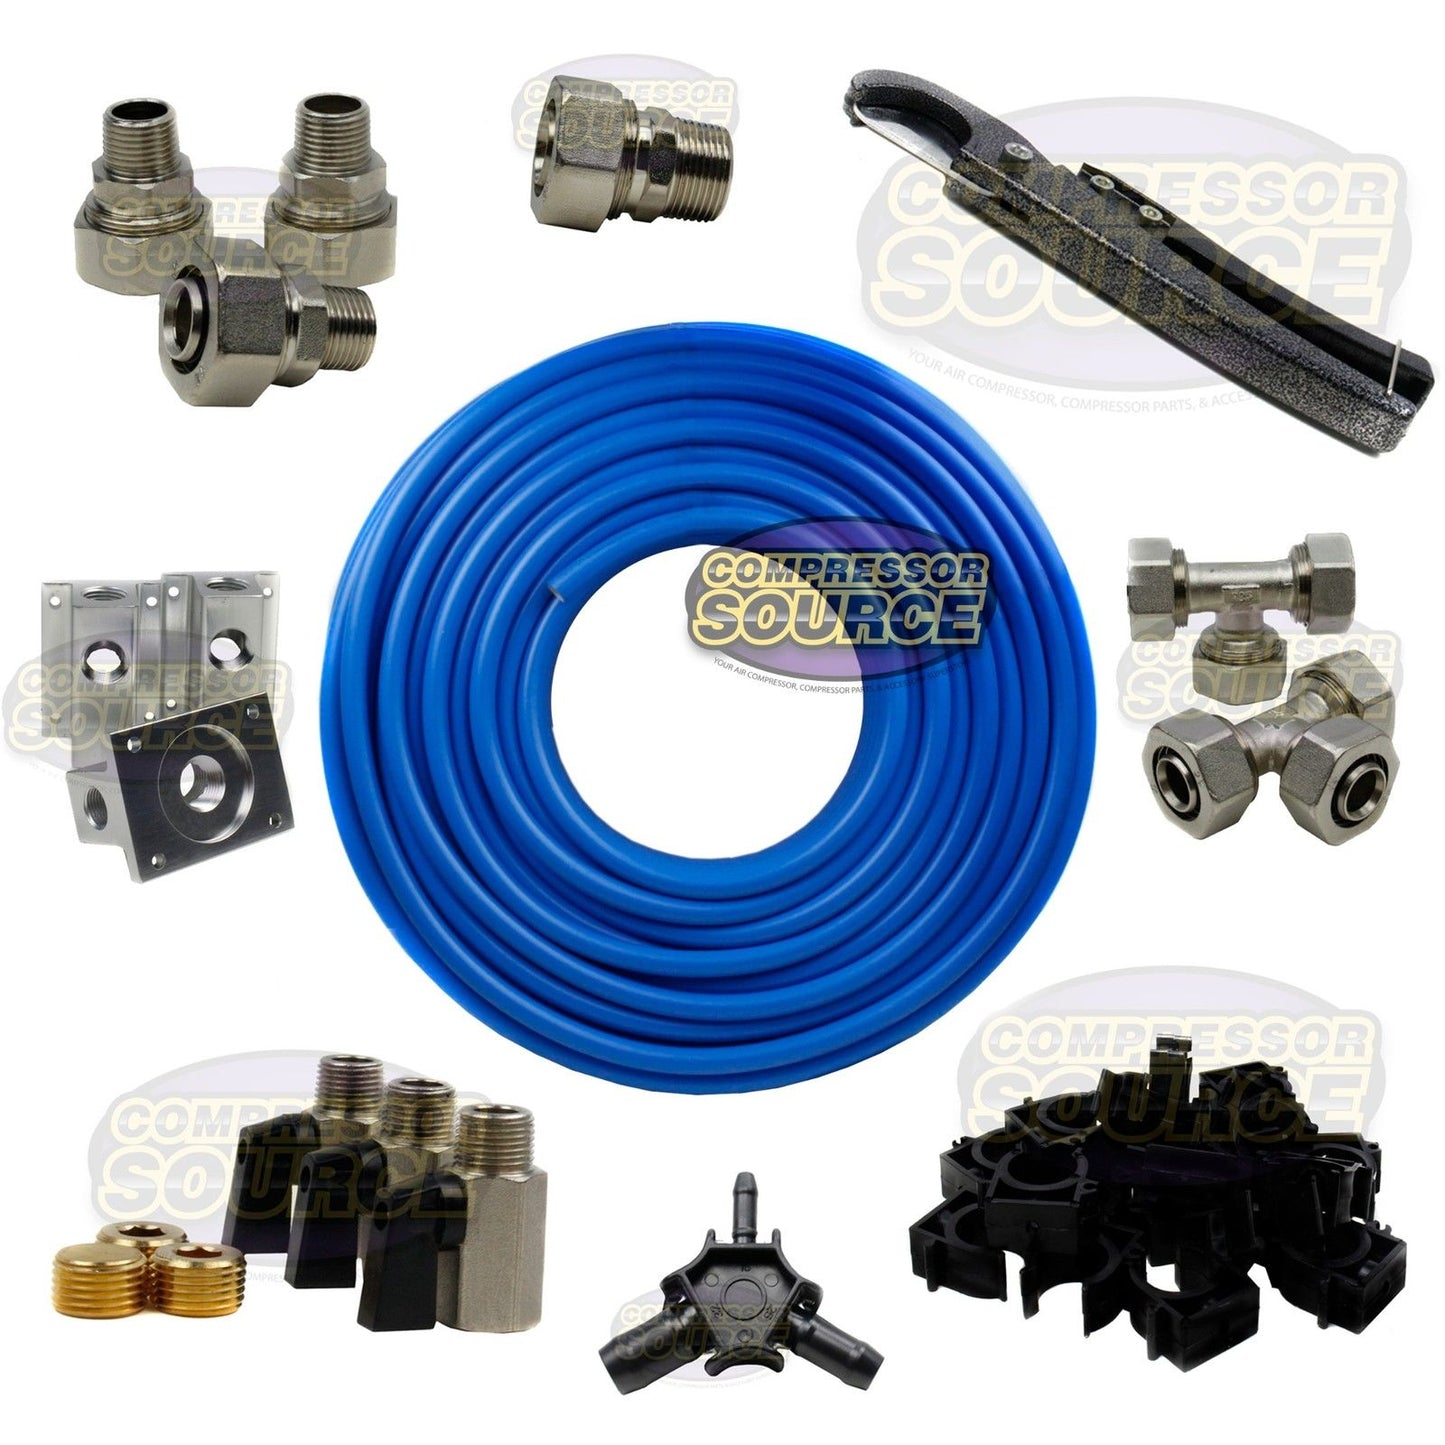 MaxLine Compressed Air Tubing Piping System Master Kit 3/4" Line 300 FT M7580